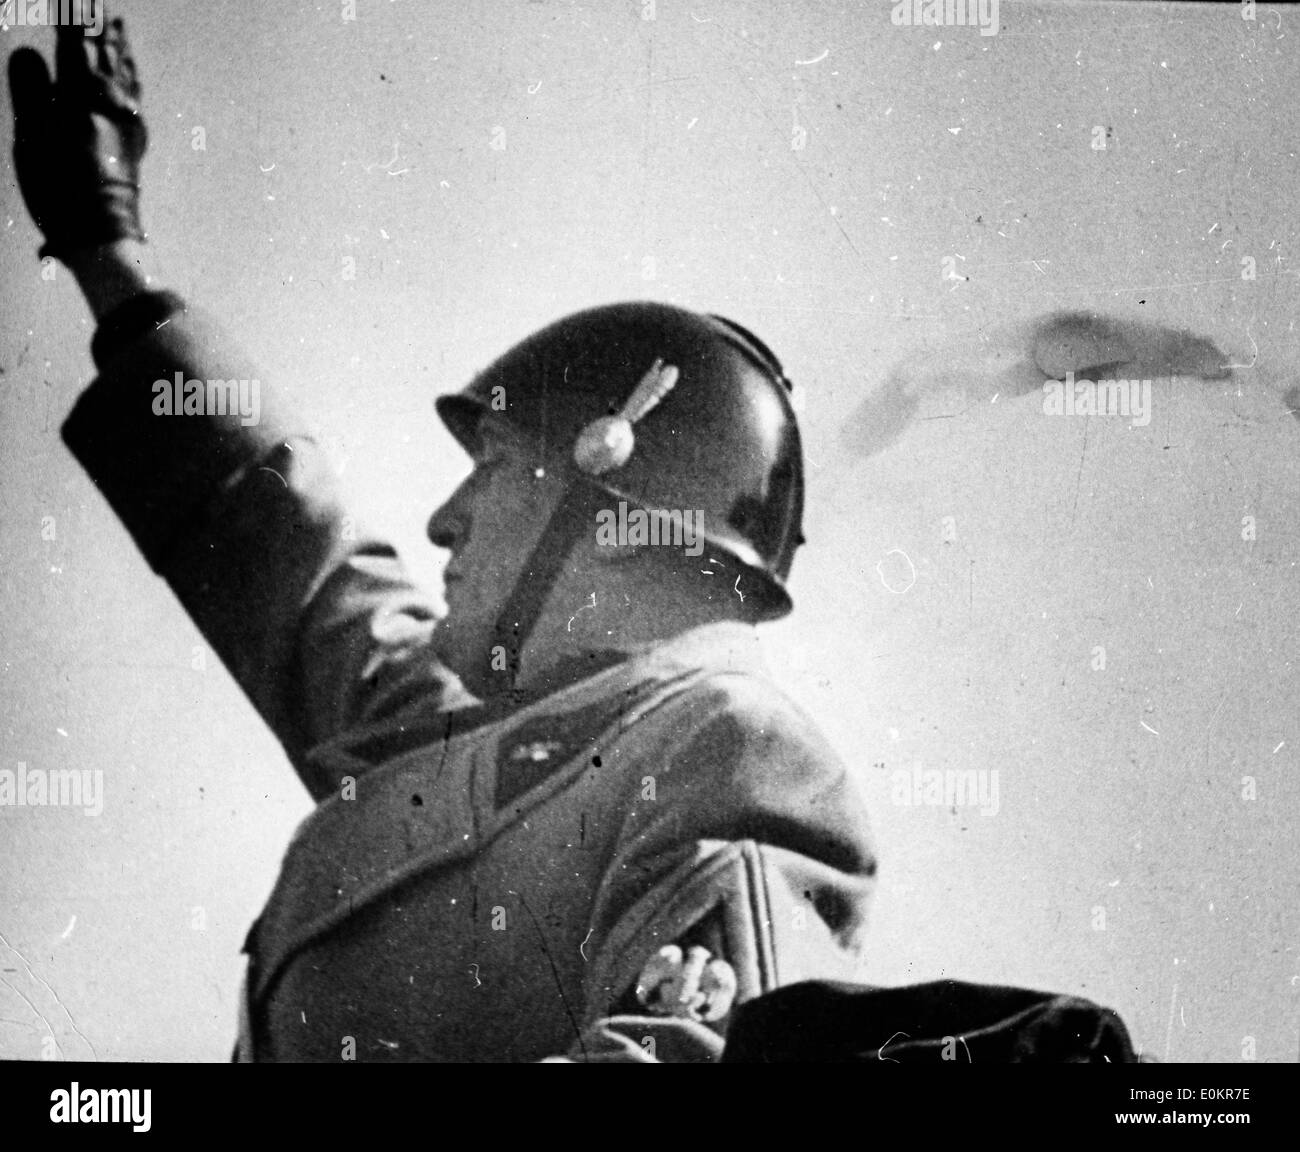 Benito Mussolini Stock Photos Benito Mussolini Stock Images Alamy Images, Photos, Reviews